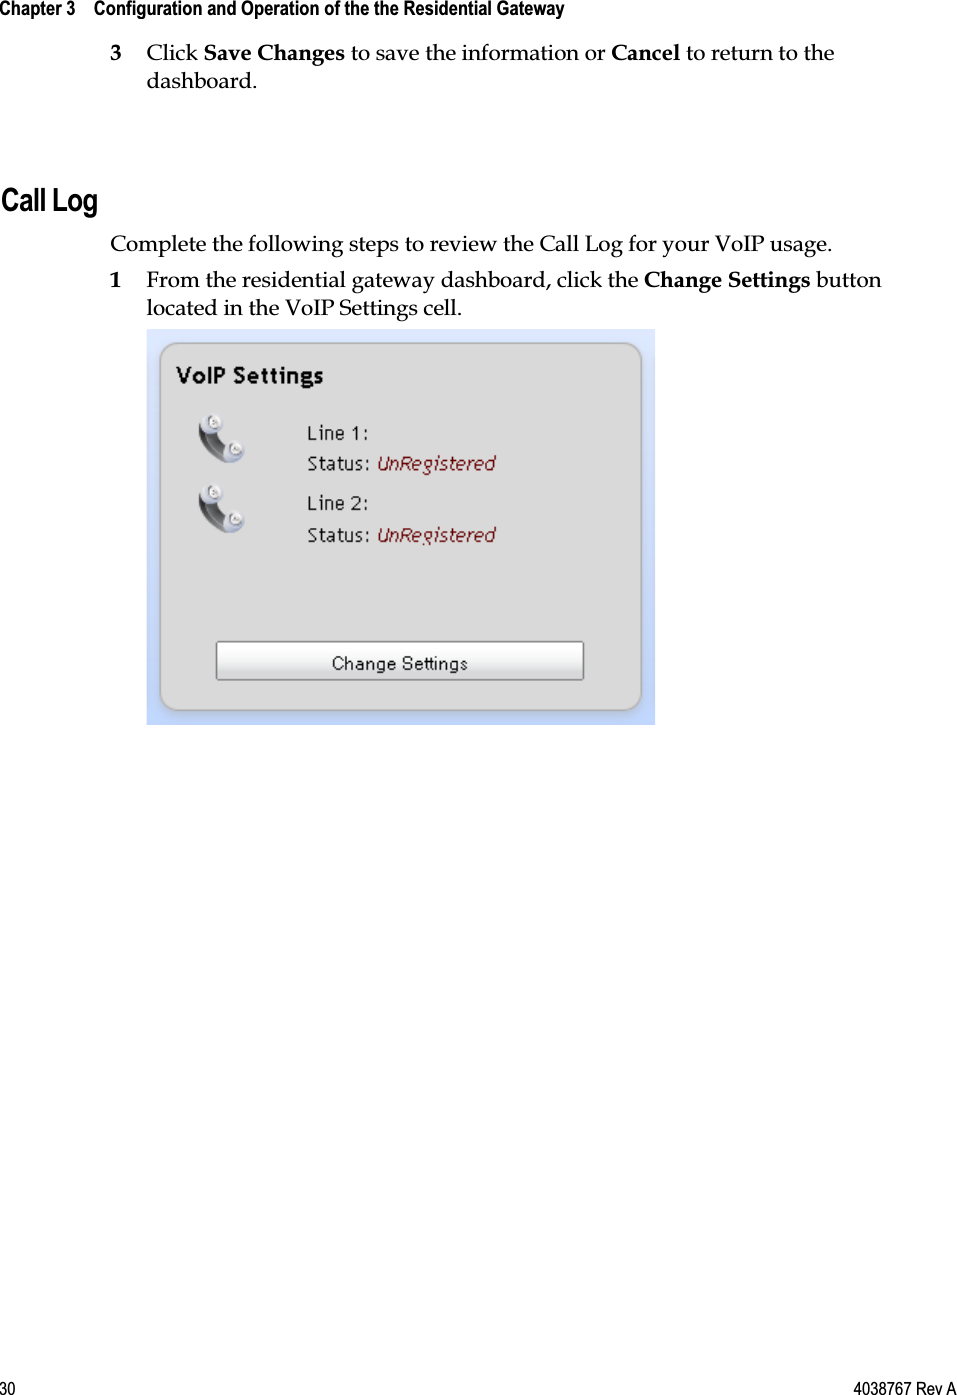  Chapter 3    Configuration and Operation of the the Residential Gateway    30  4038767 Rev A 3 Click Save Changes to save the information or Cancel to return to the dashboard.   Call Log Complete the following steps to review the Call Log for your VoIP usage. 1 From the residential gateway dashboard, click the Change Settings button located in the VoIP Settings cell.   